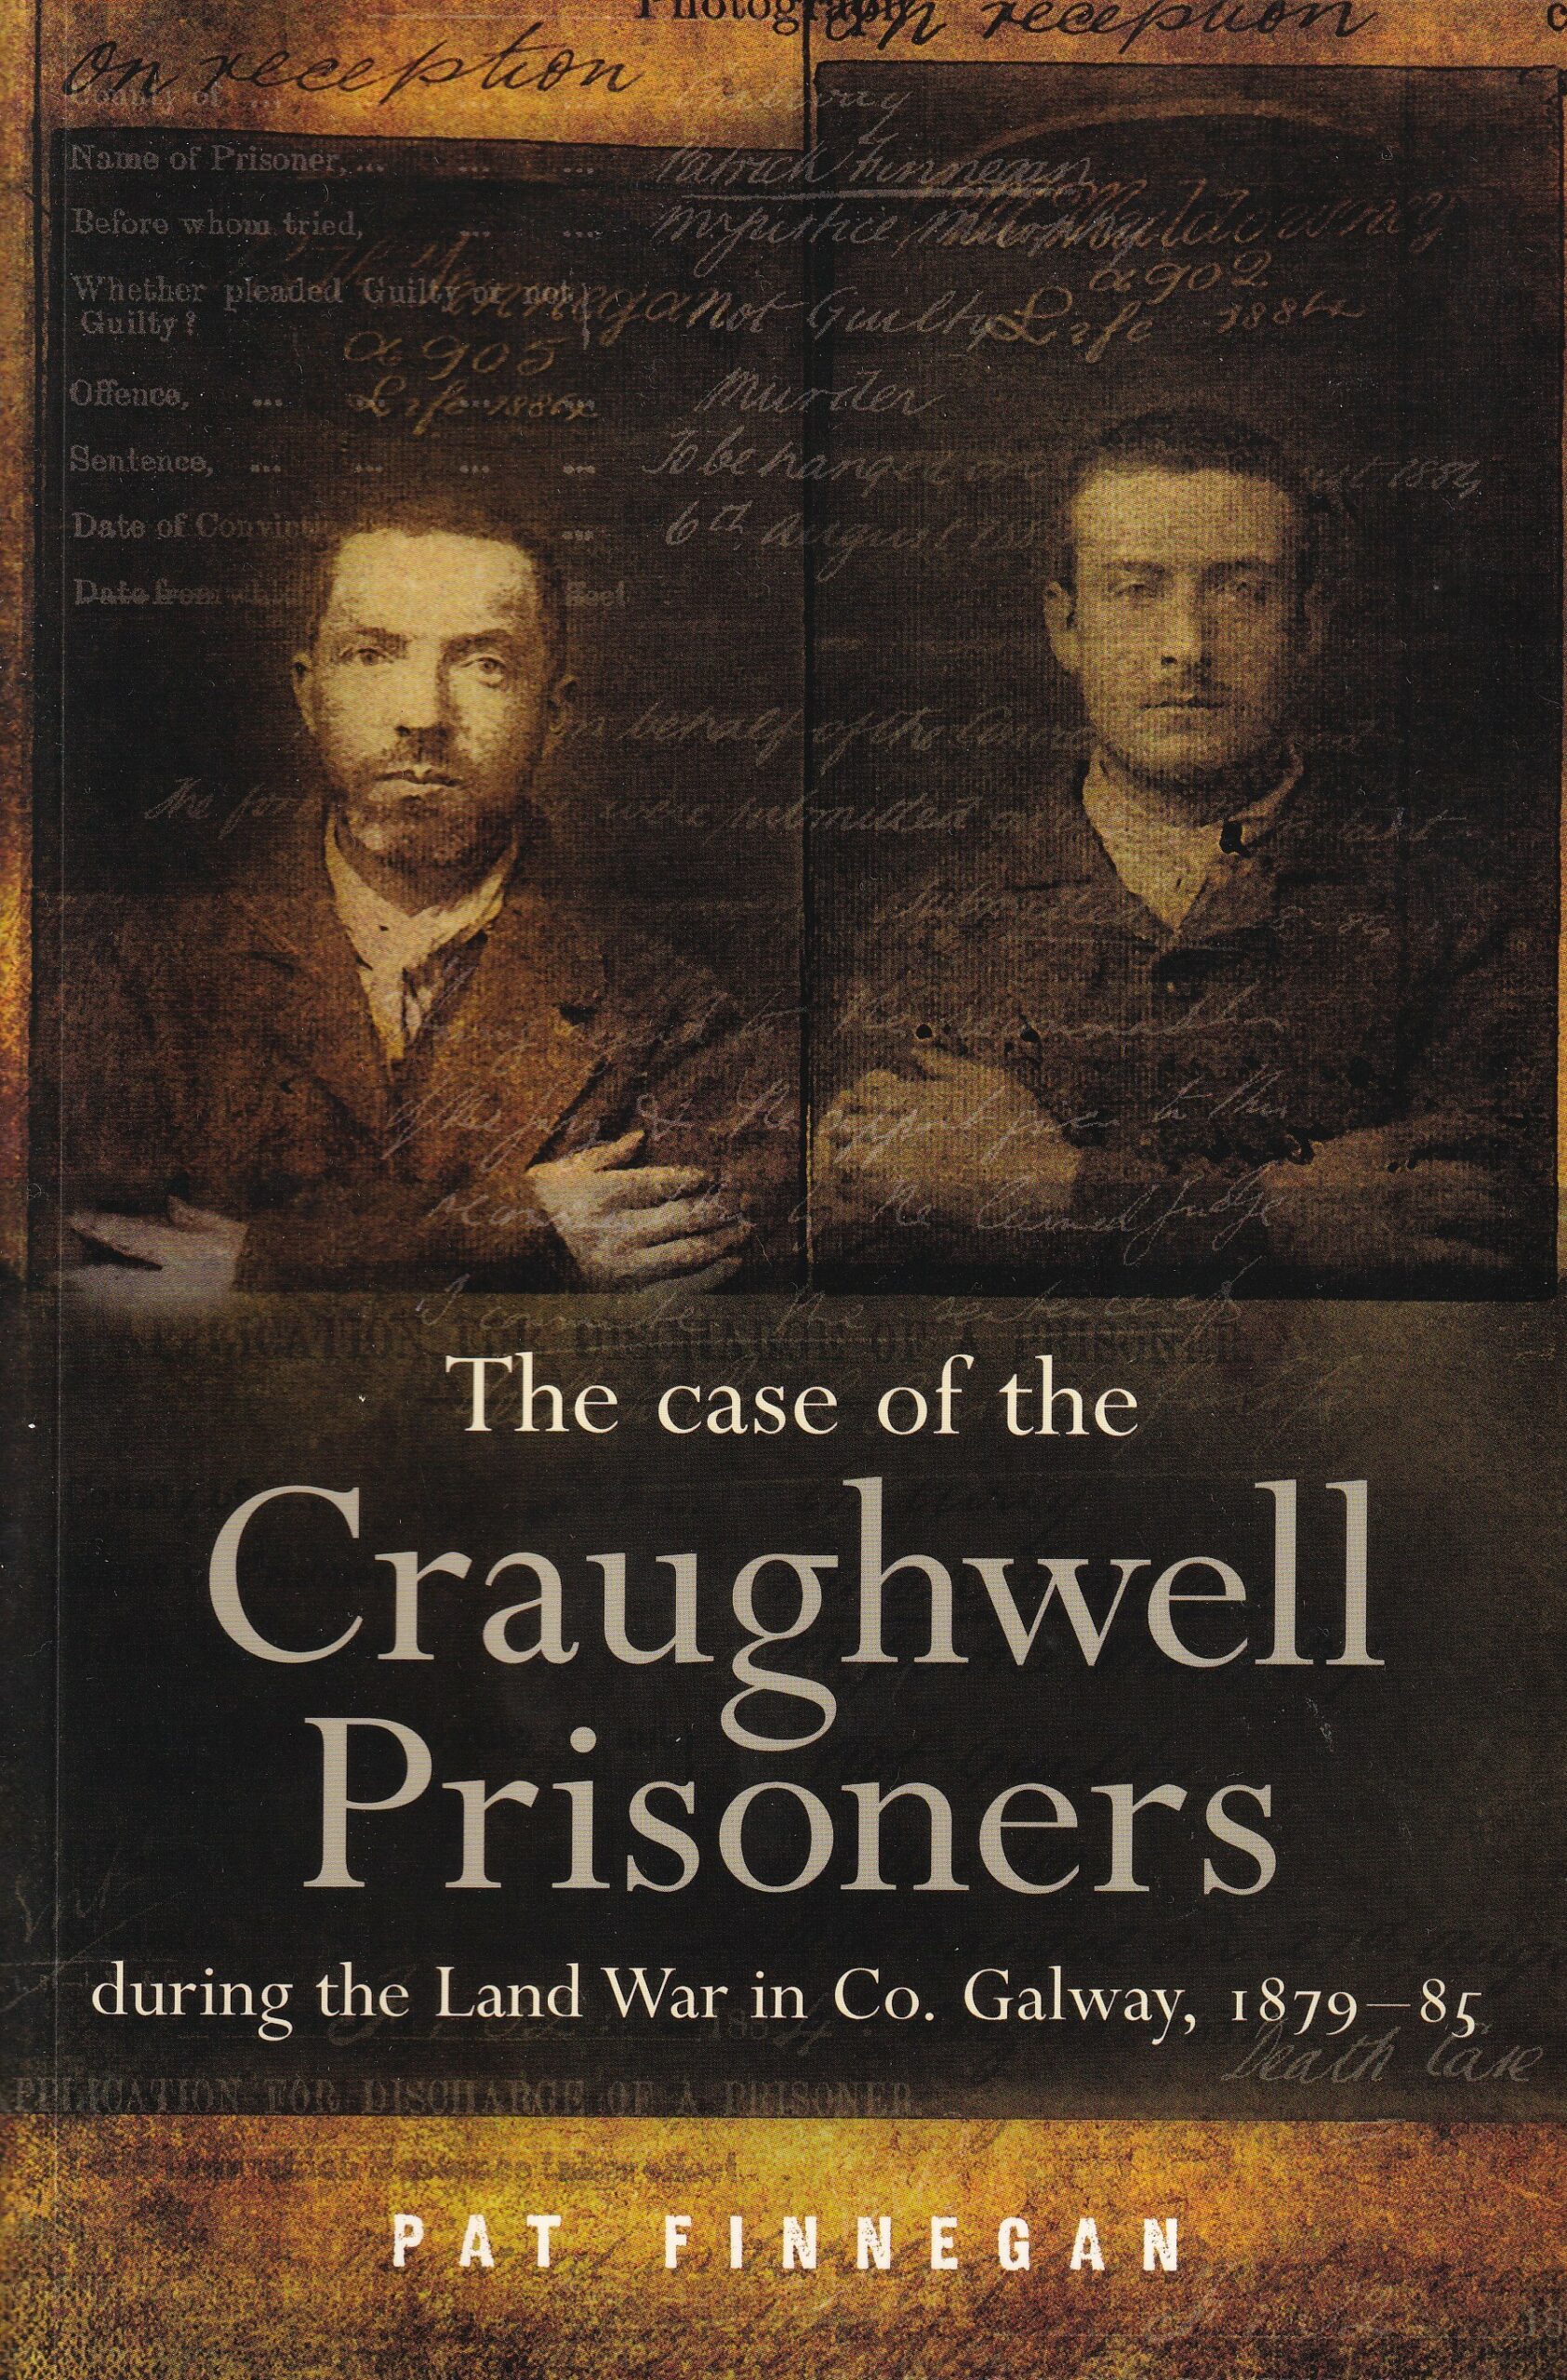 The Case of the Craughwell Prisoners during the Land War in Co. Galway, 1879-85-Signed by Pat Finnegan